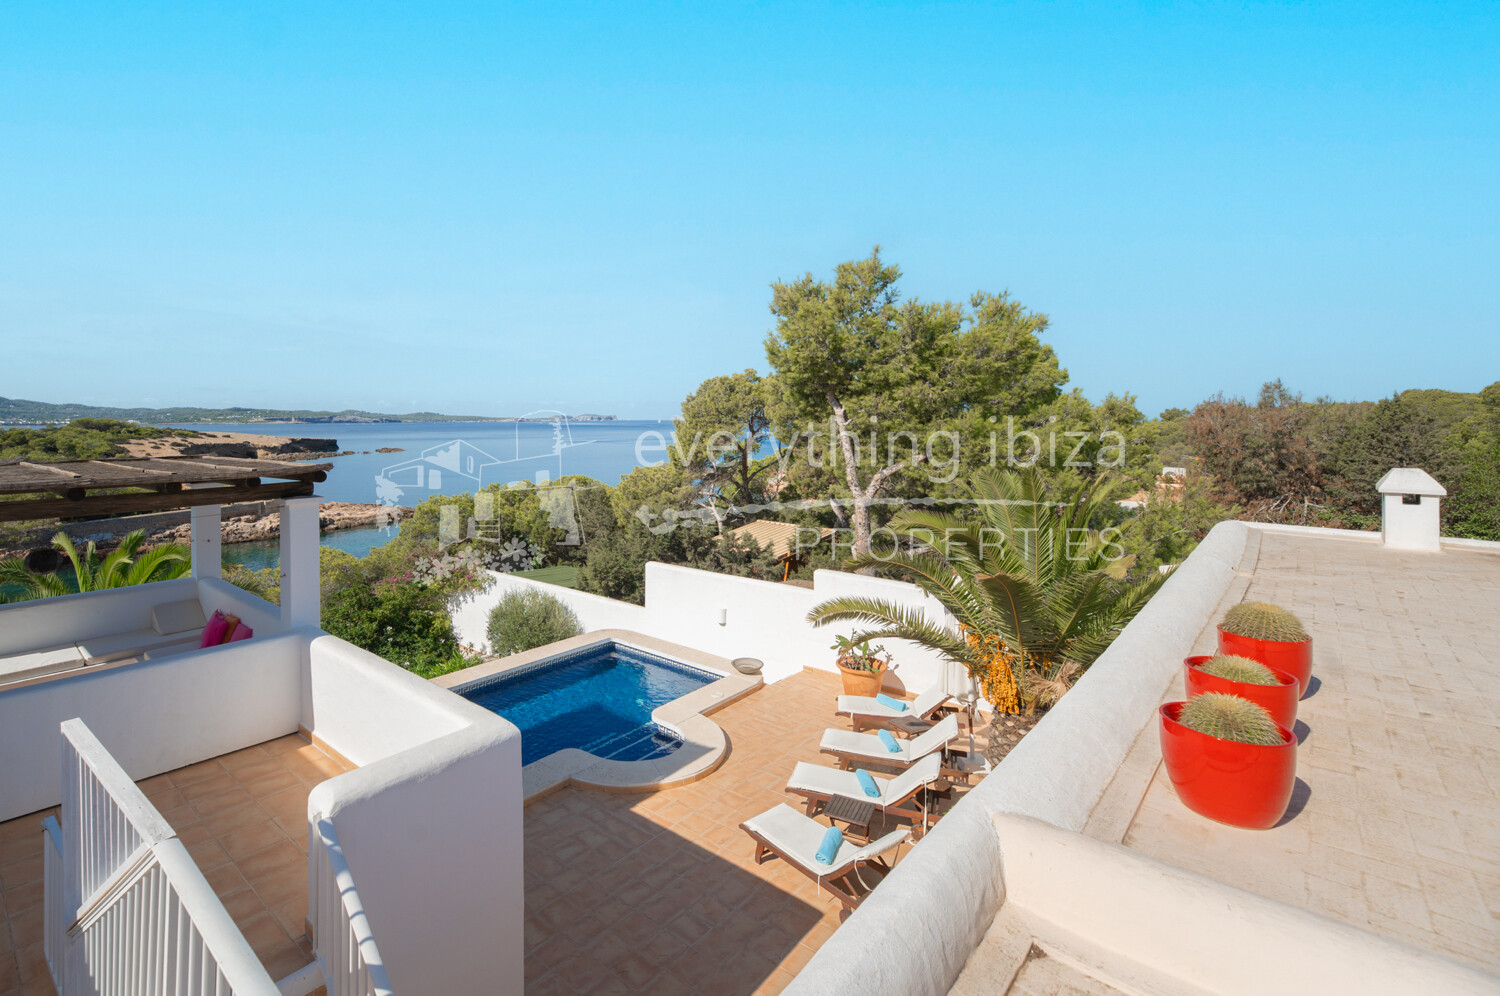 Frontline Detached Villa with Character and Direct Access to the Beach, ref. 1713, for sale in Ibiza by everything ibiza Properties